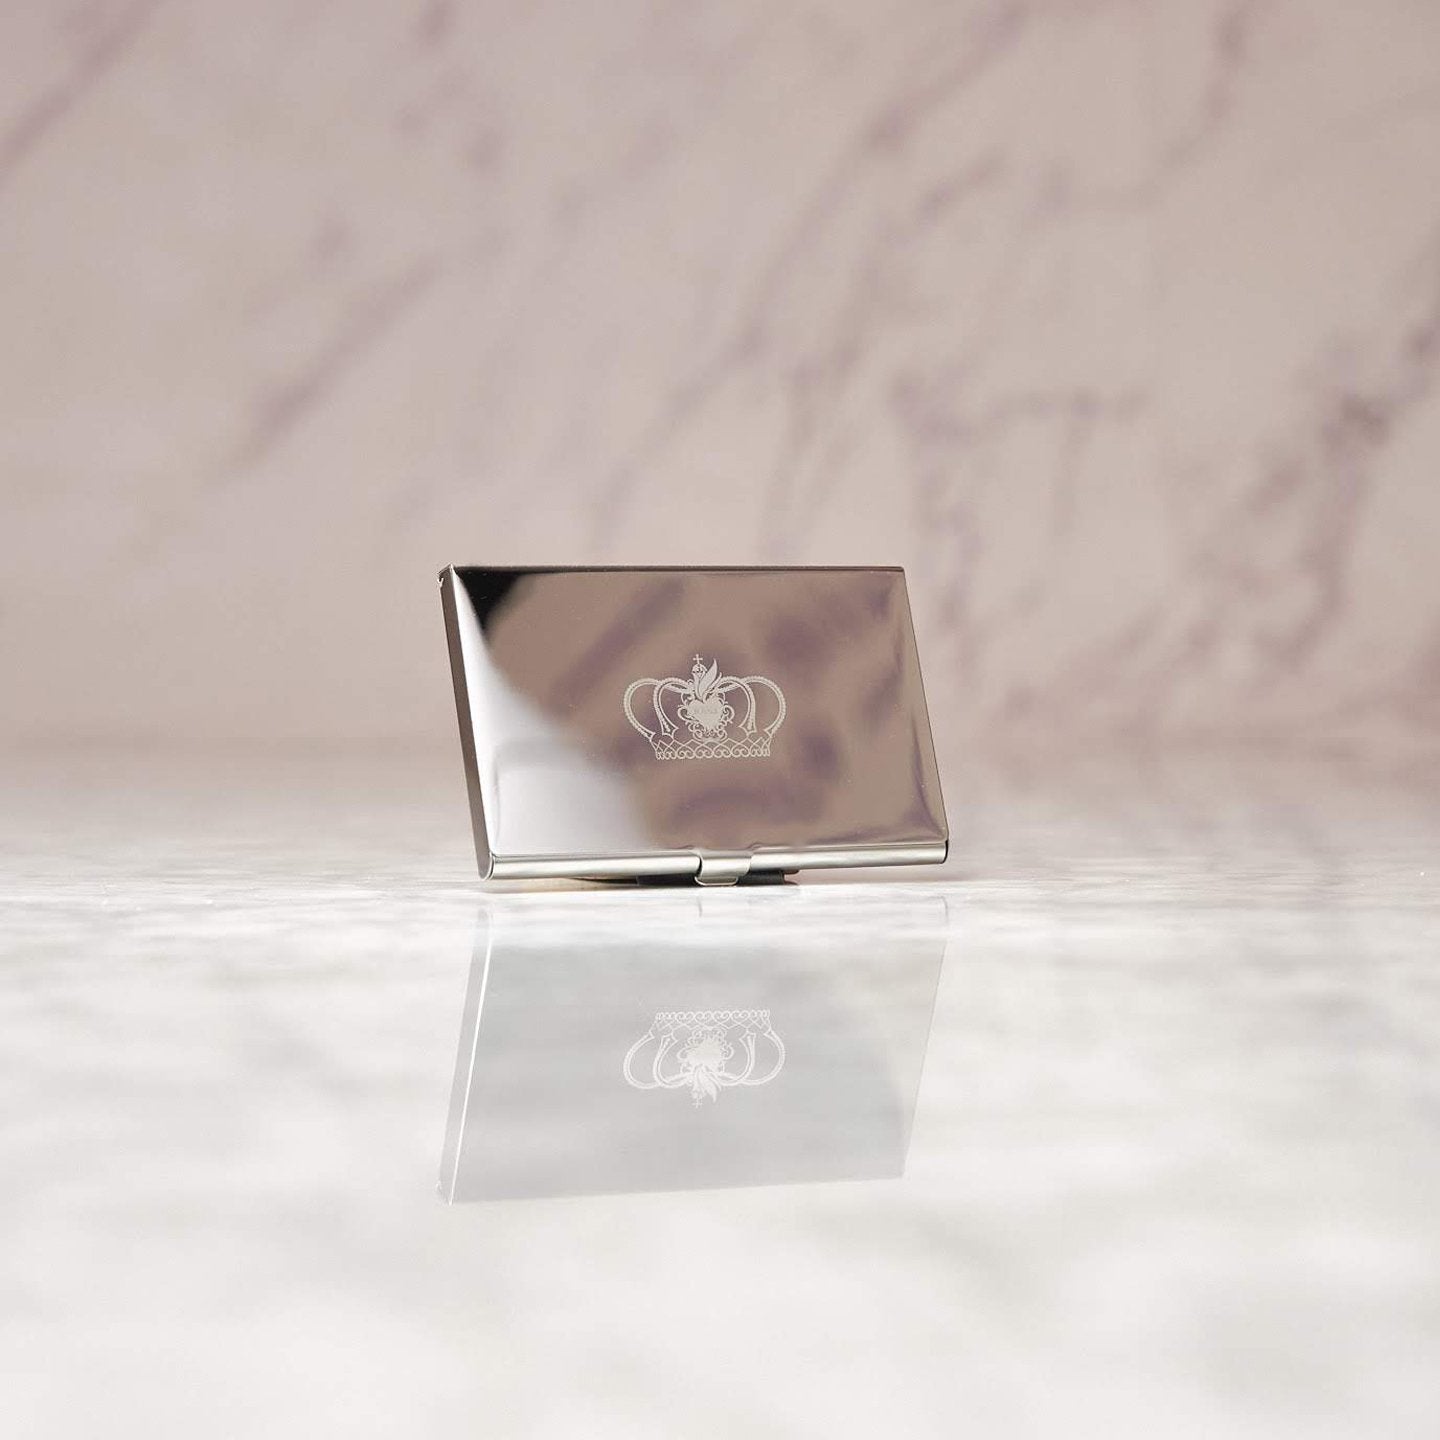 Pack of Blessings with Royals Stainless Steel Card Holder